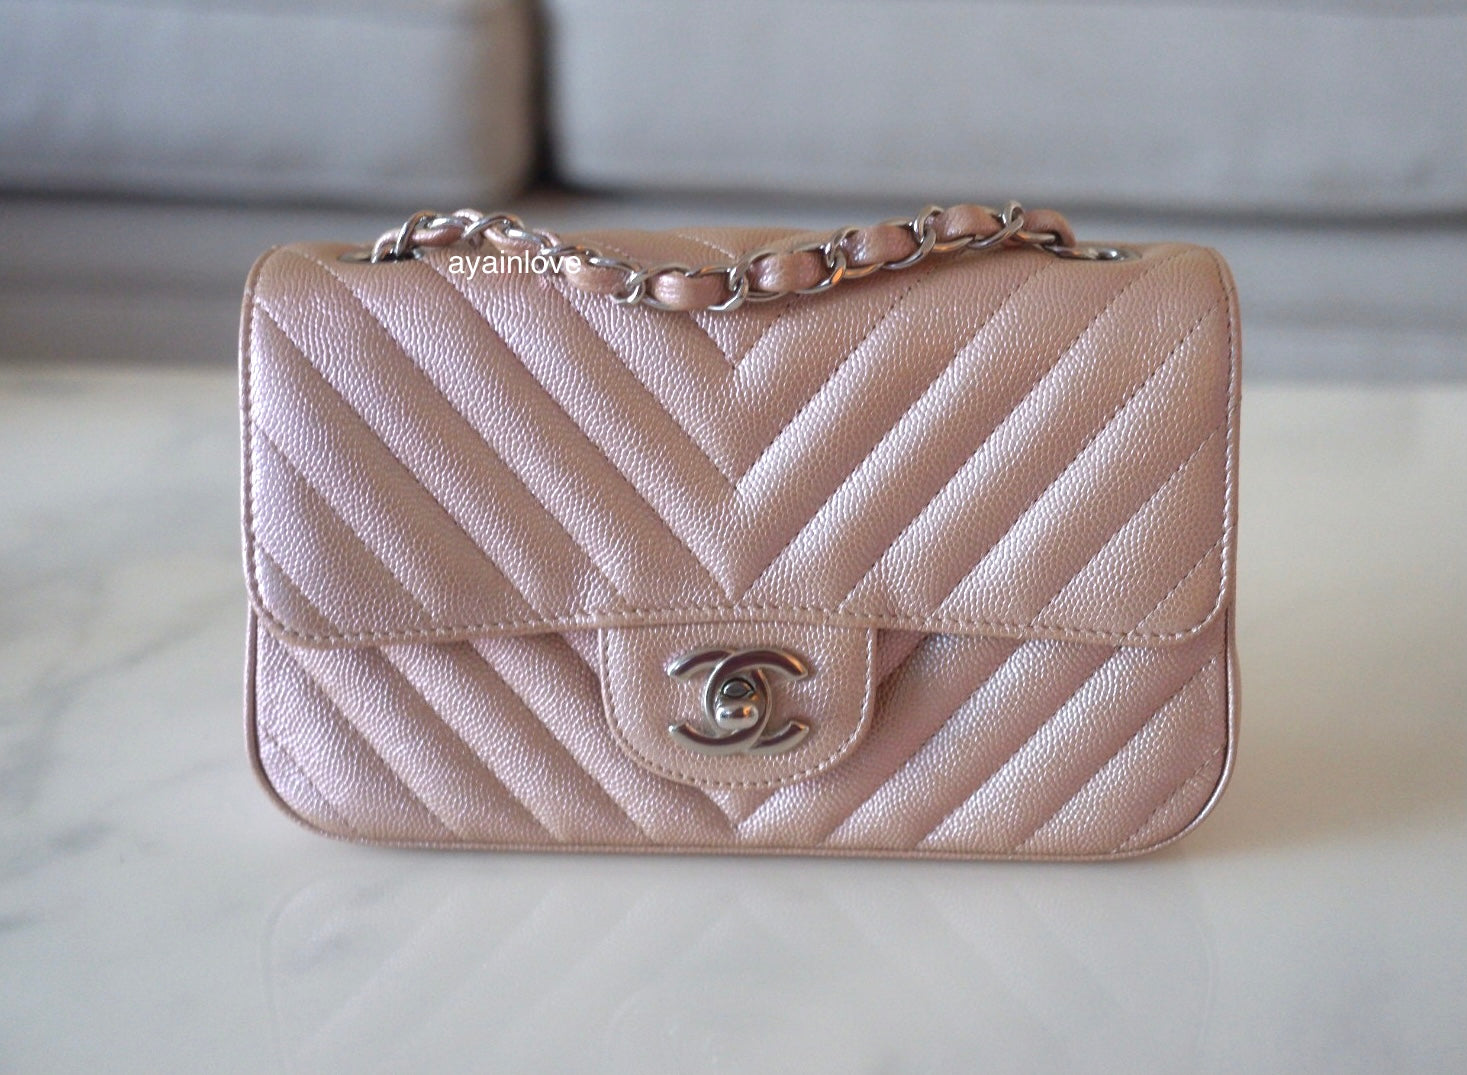 Chanel Iridescent Rose Gold Chevron Quilted Caviar Mini Flap